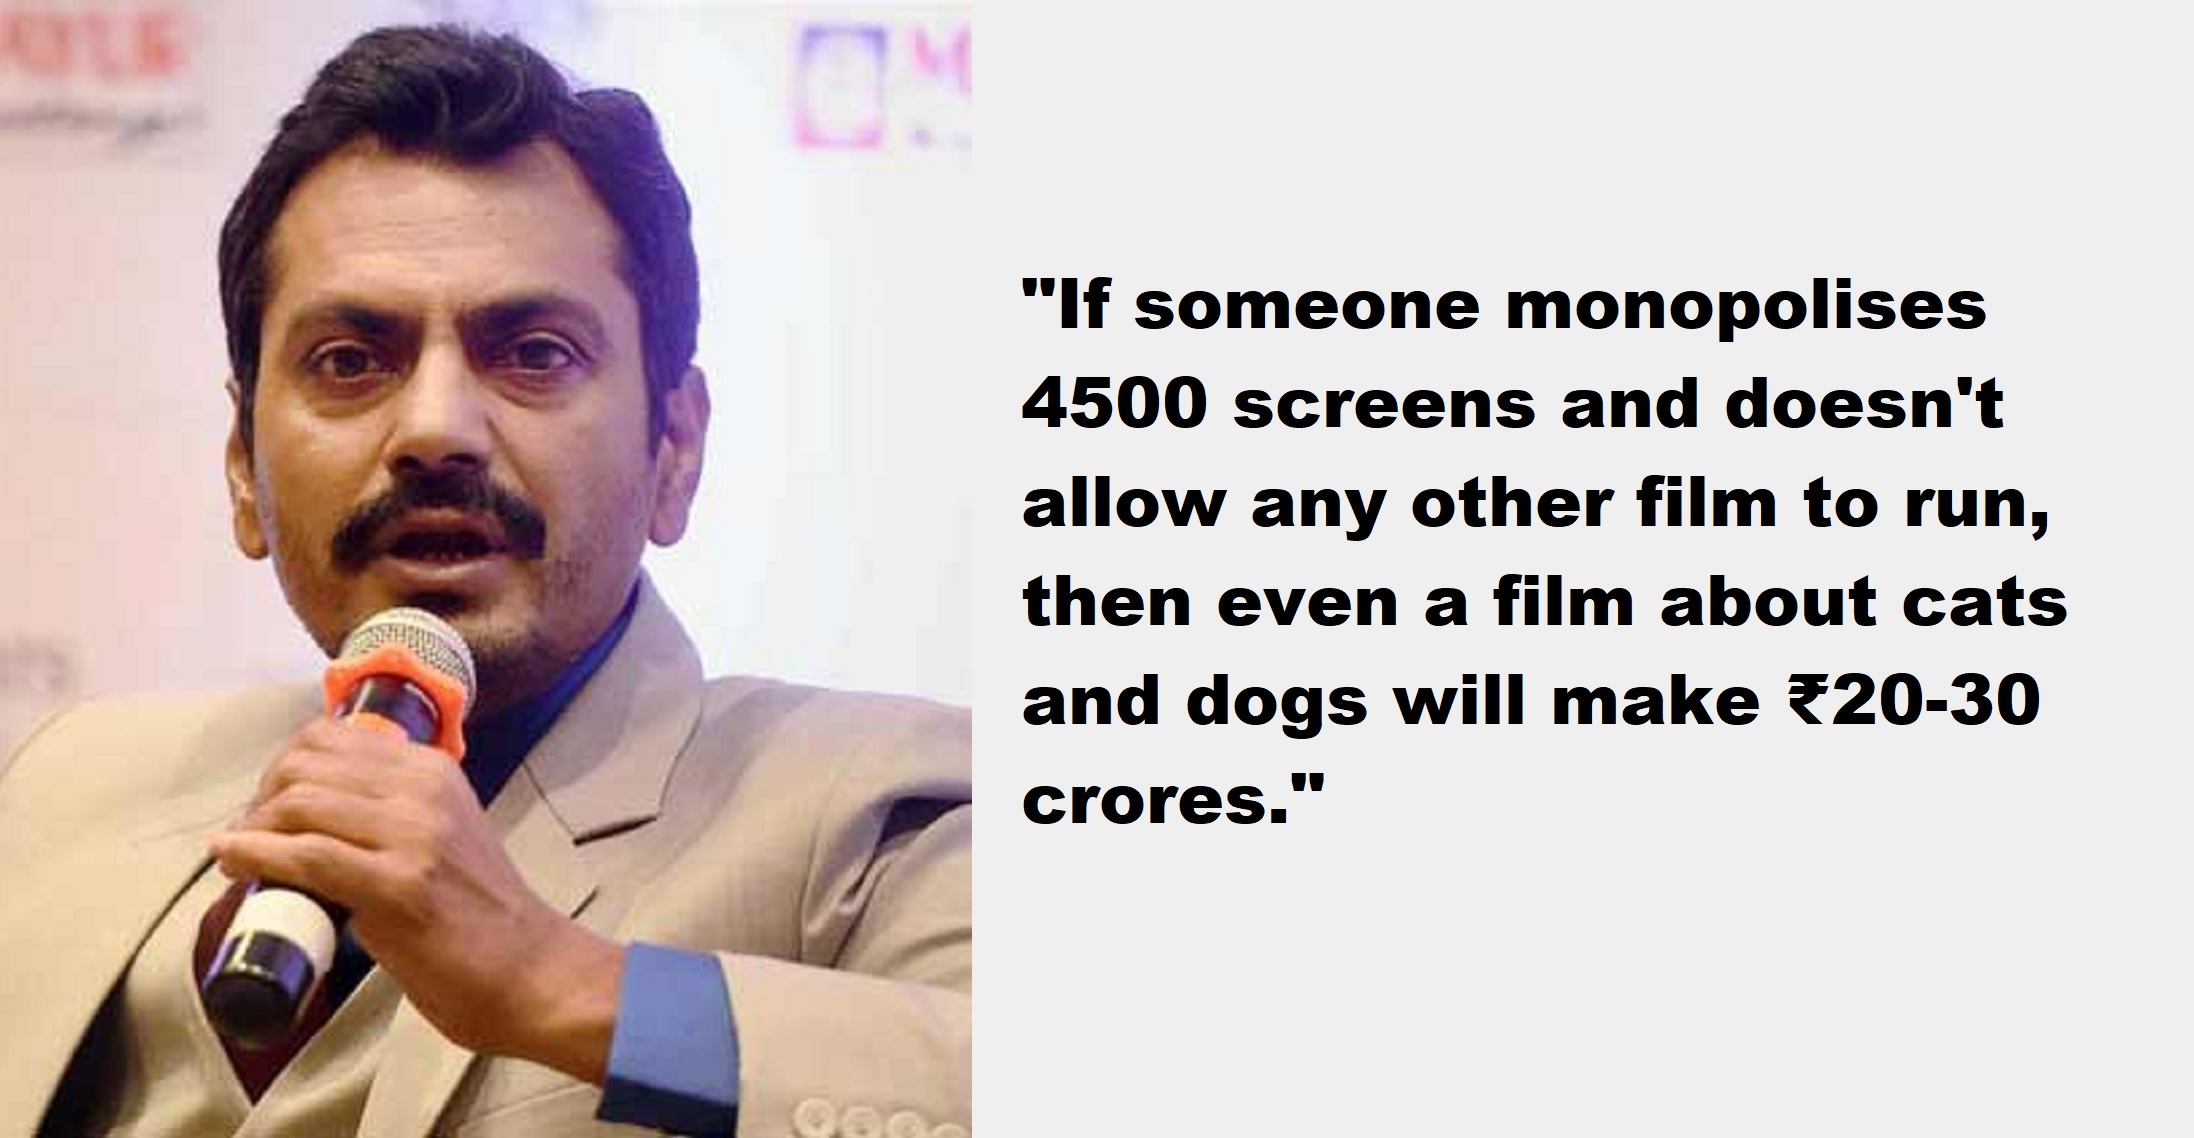 Nawazuddin Siddiqui: “Even a film with cats and dogs can make ₹20-30 crores with 4500 screens”